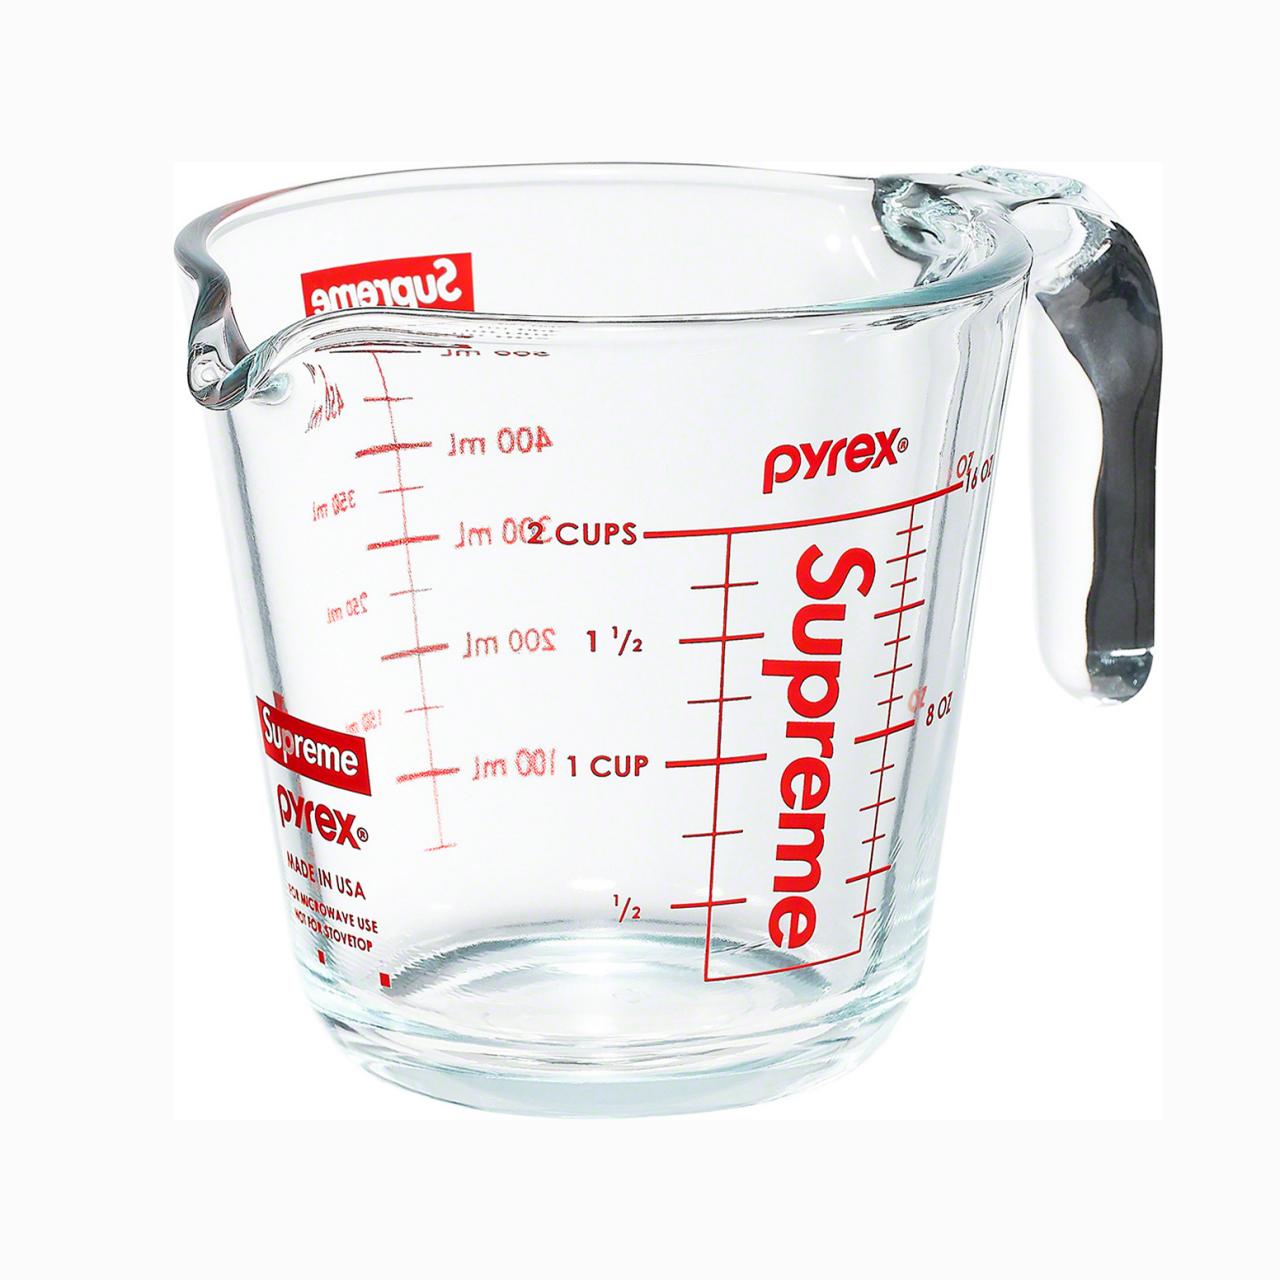 https://food.fnr.sndimg.com/content/dam/images/food/products/2019/8/22/rx_supreme-pyrex-cup.jpg.rend.hgtvcom.1280.1280.suffix/1566493089313.jpeg